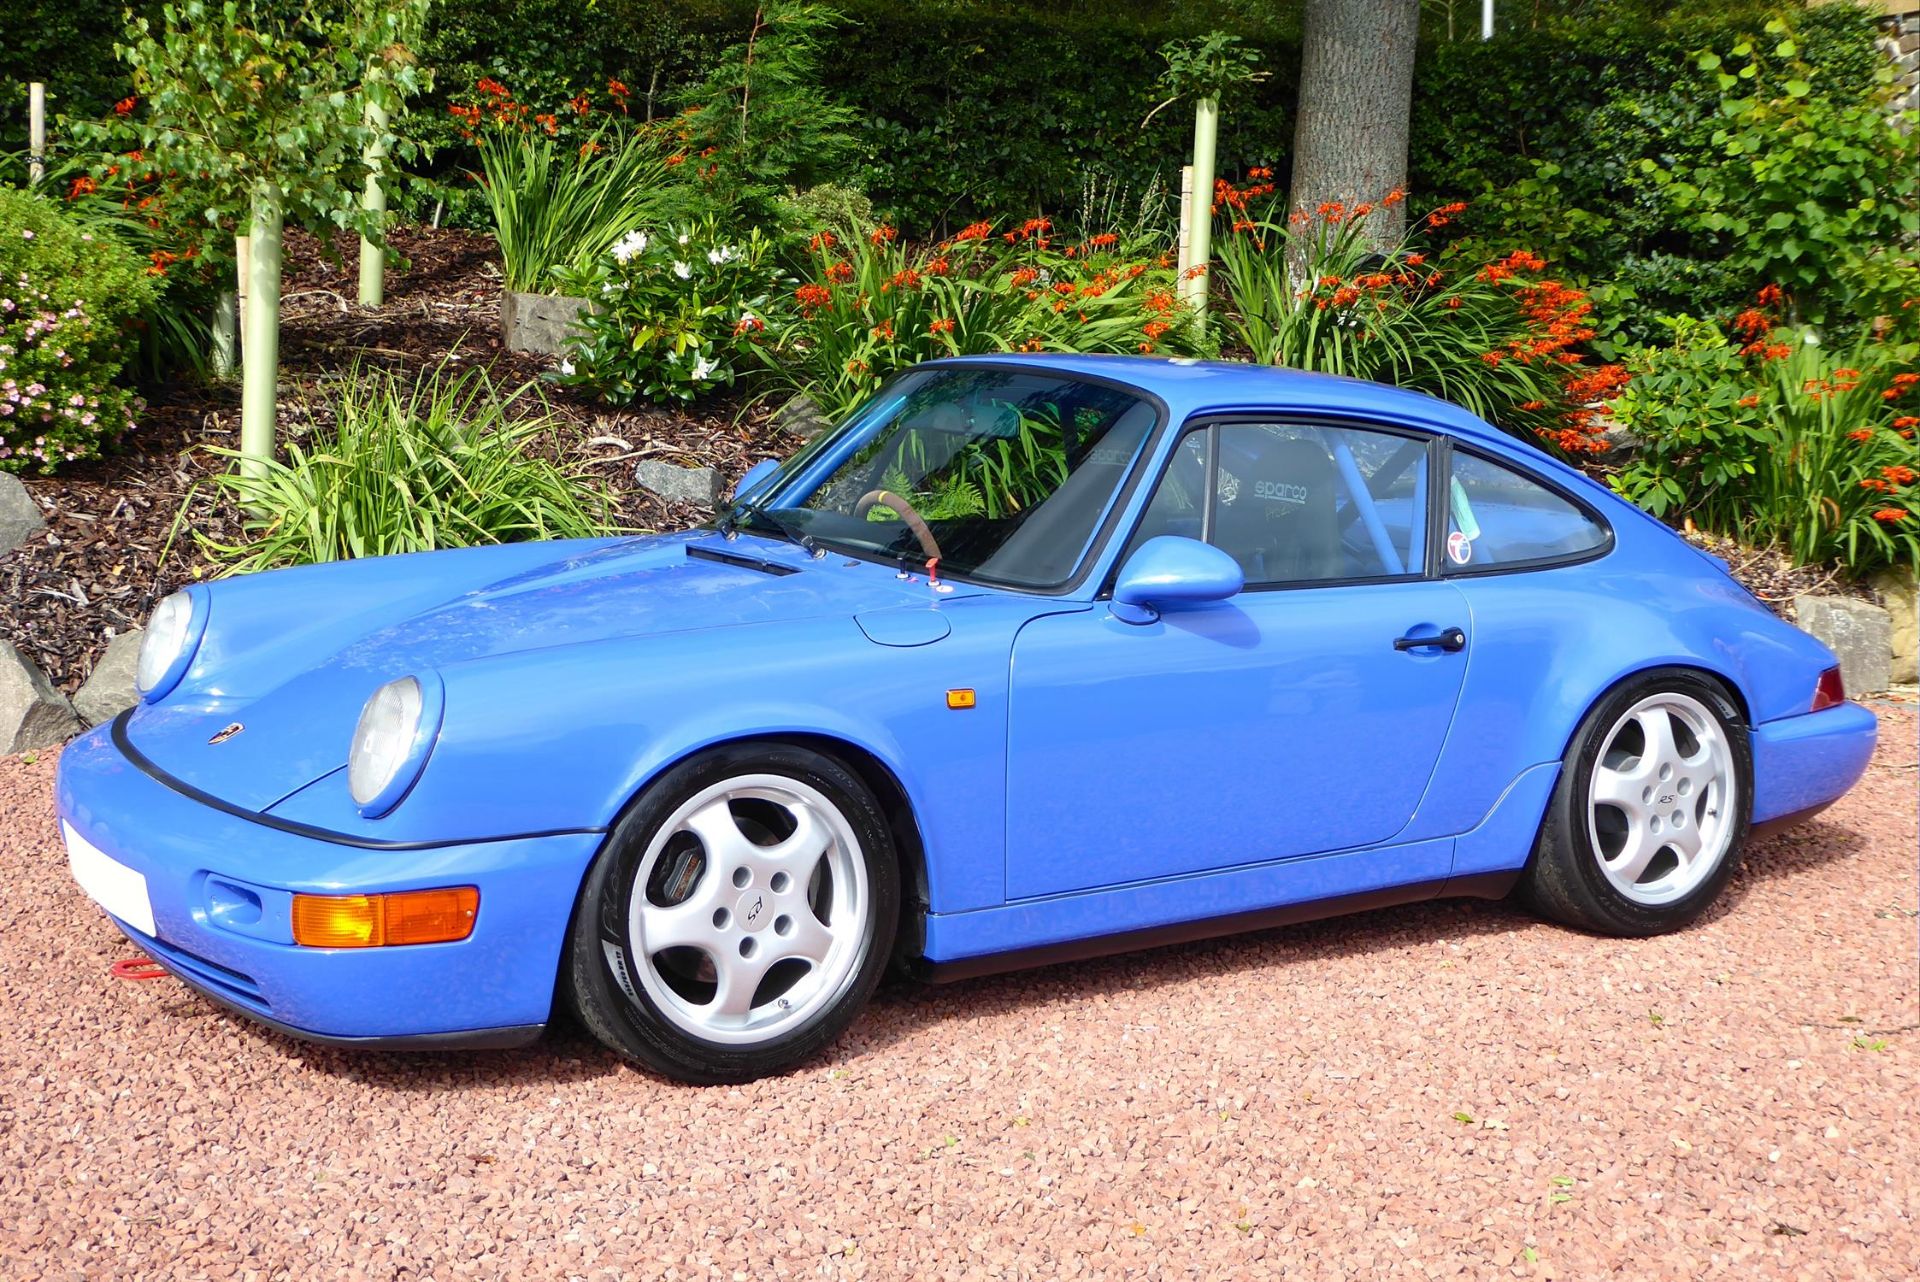 1989 Porsche 911 (964) RS N/GT Tribute - Image 6 of 10